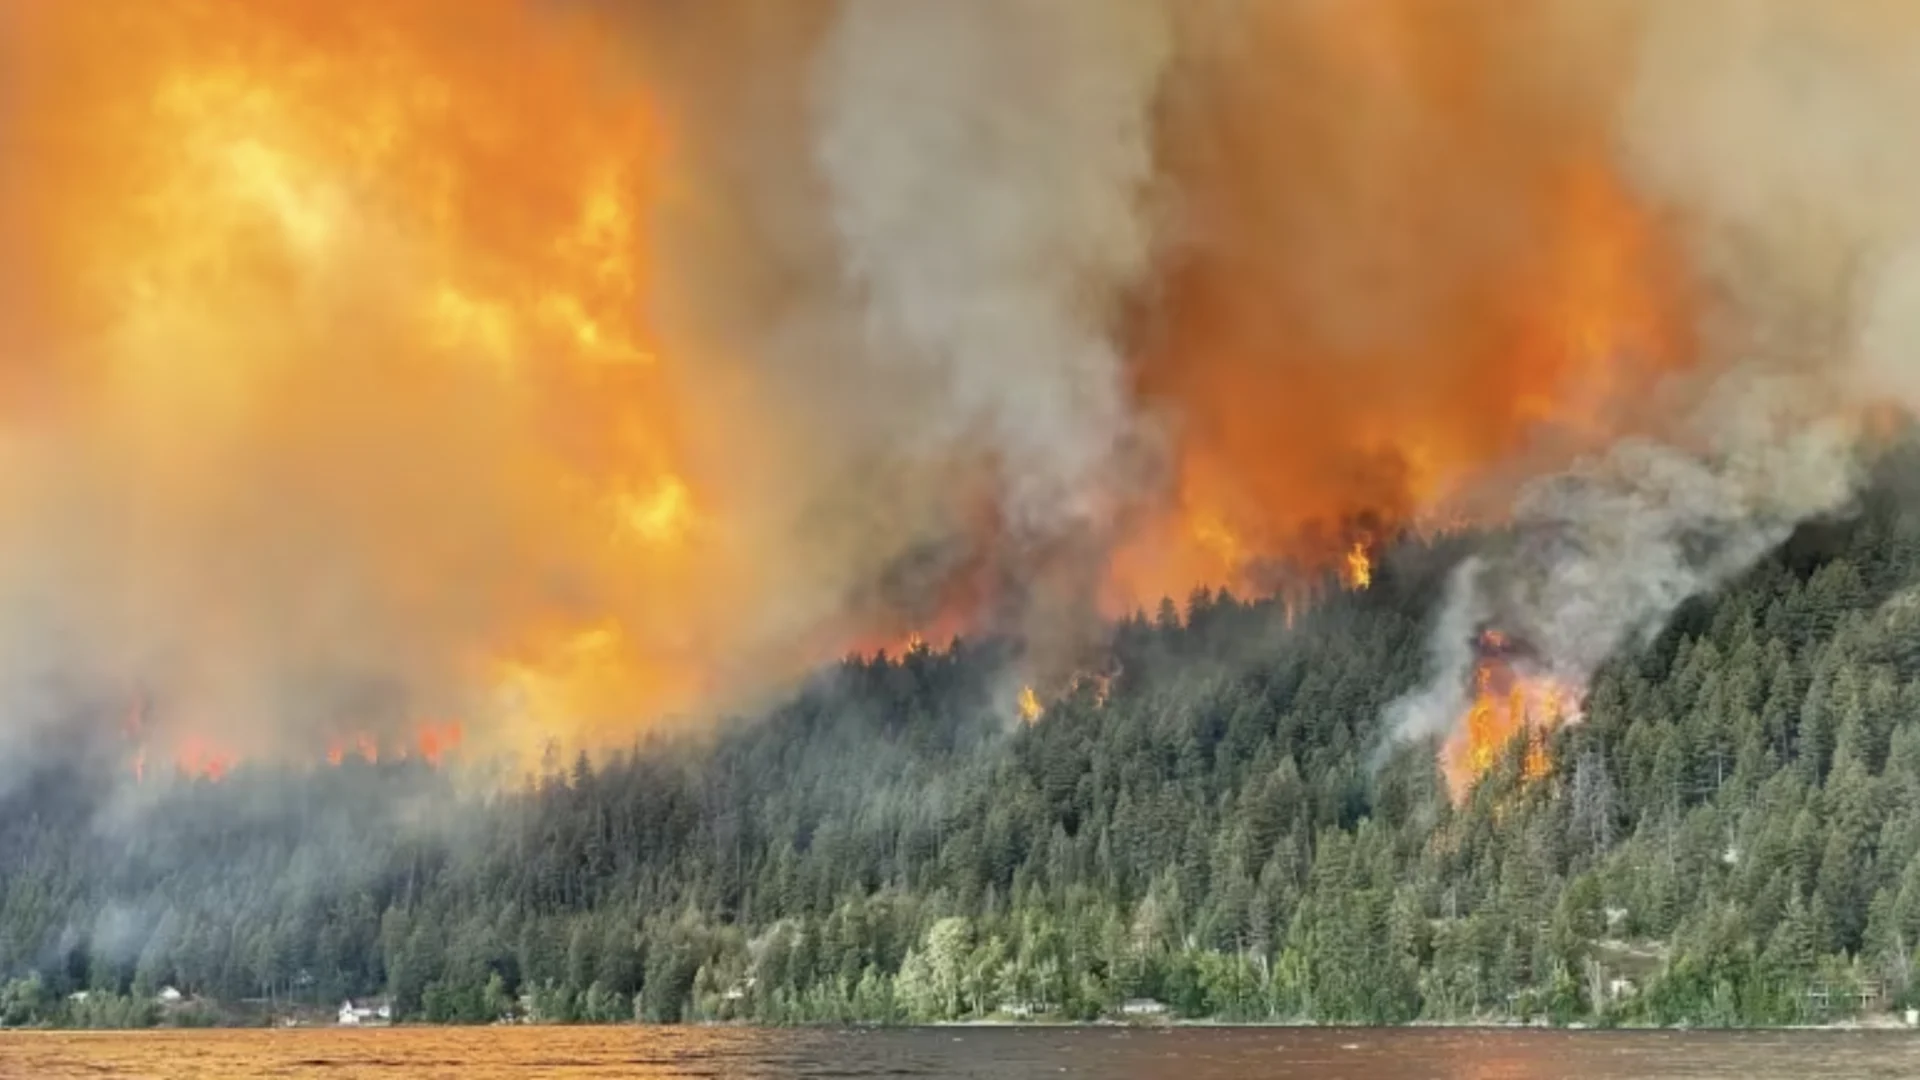 'Heartbreaking' B.C. wildfire north of Whistler, at least 5 buildings destroyed